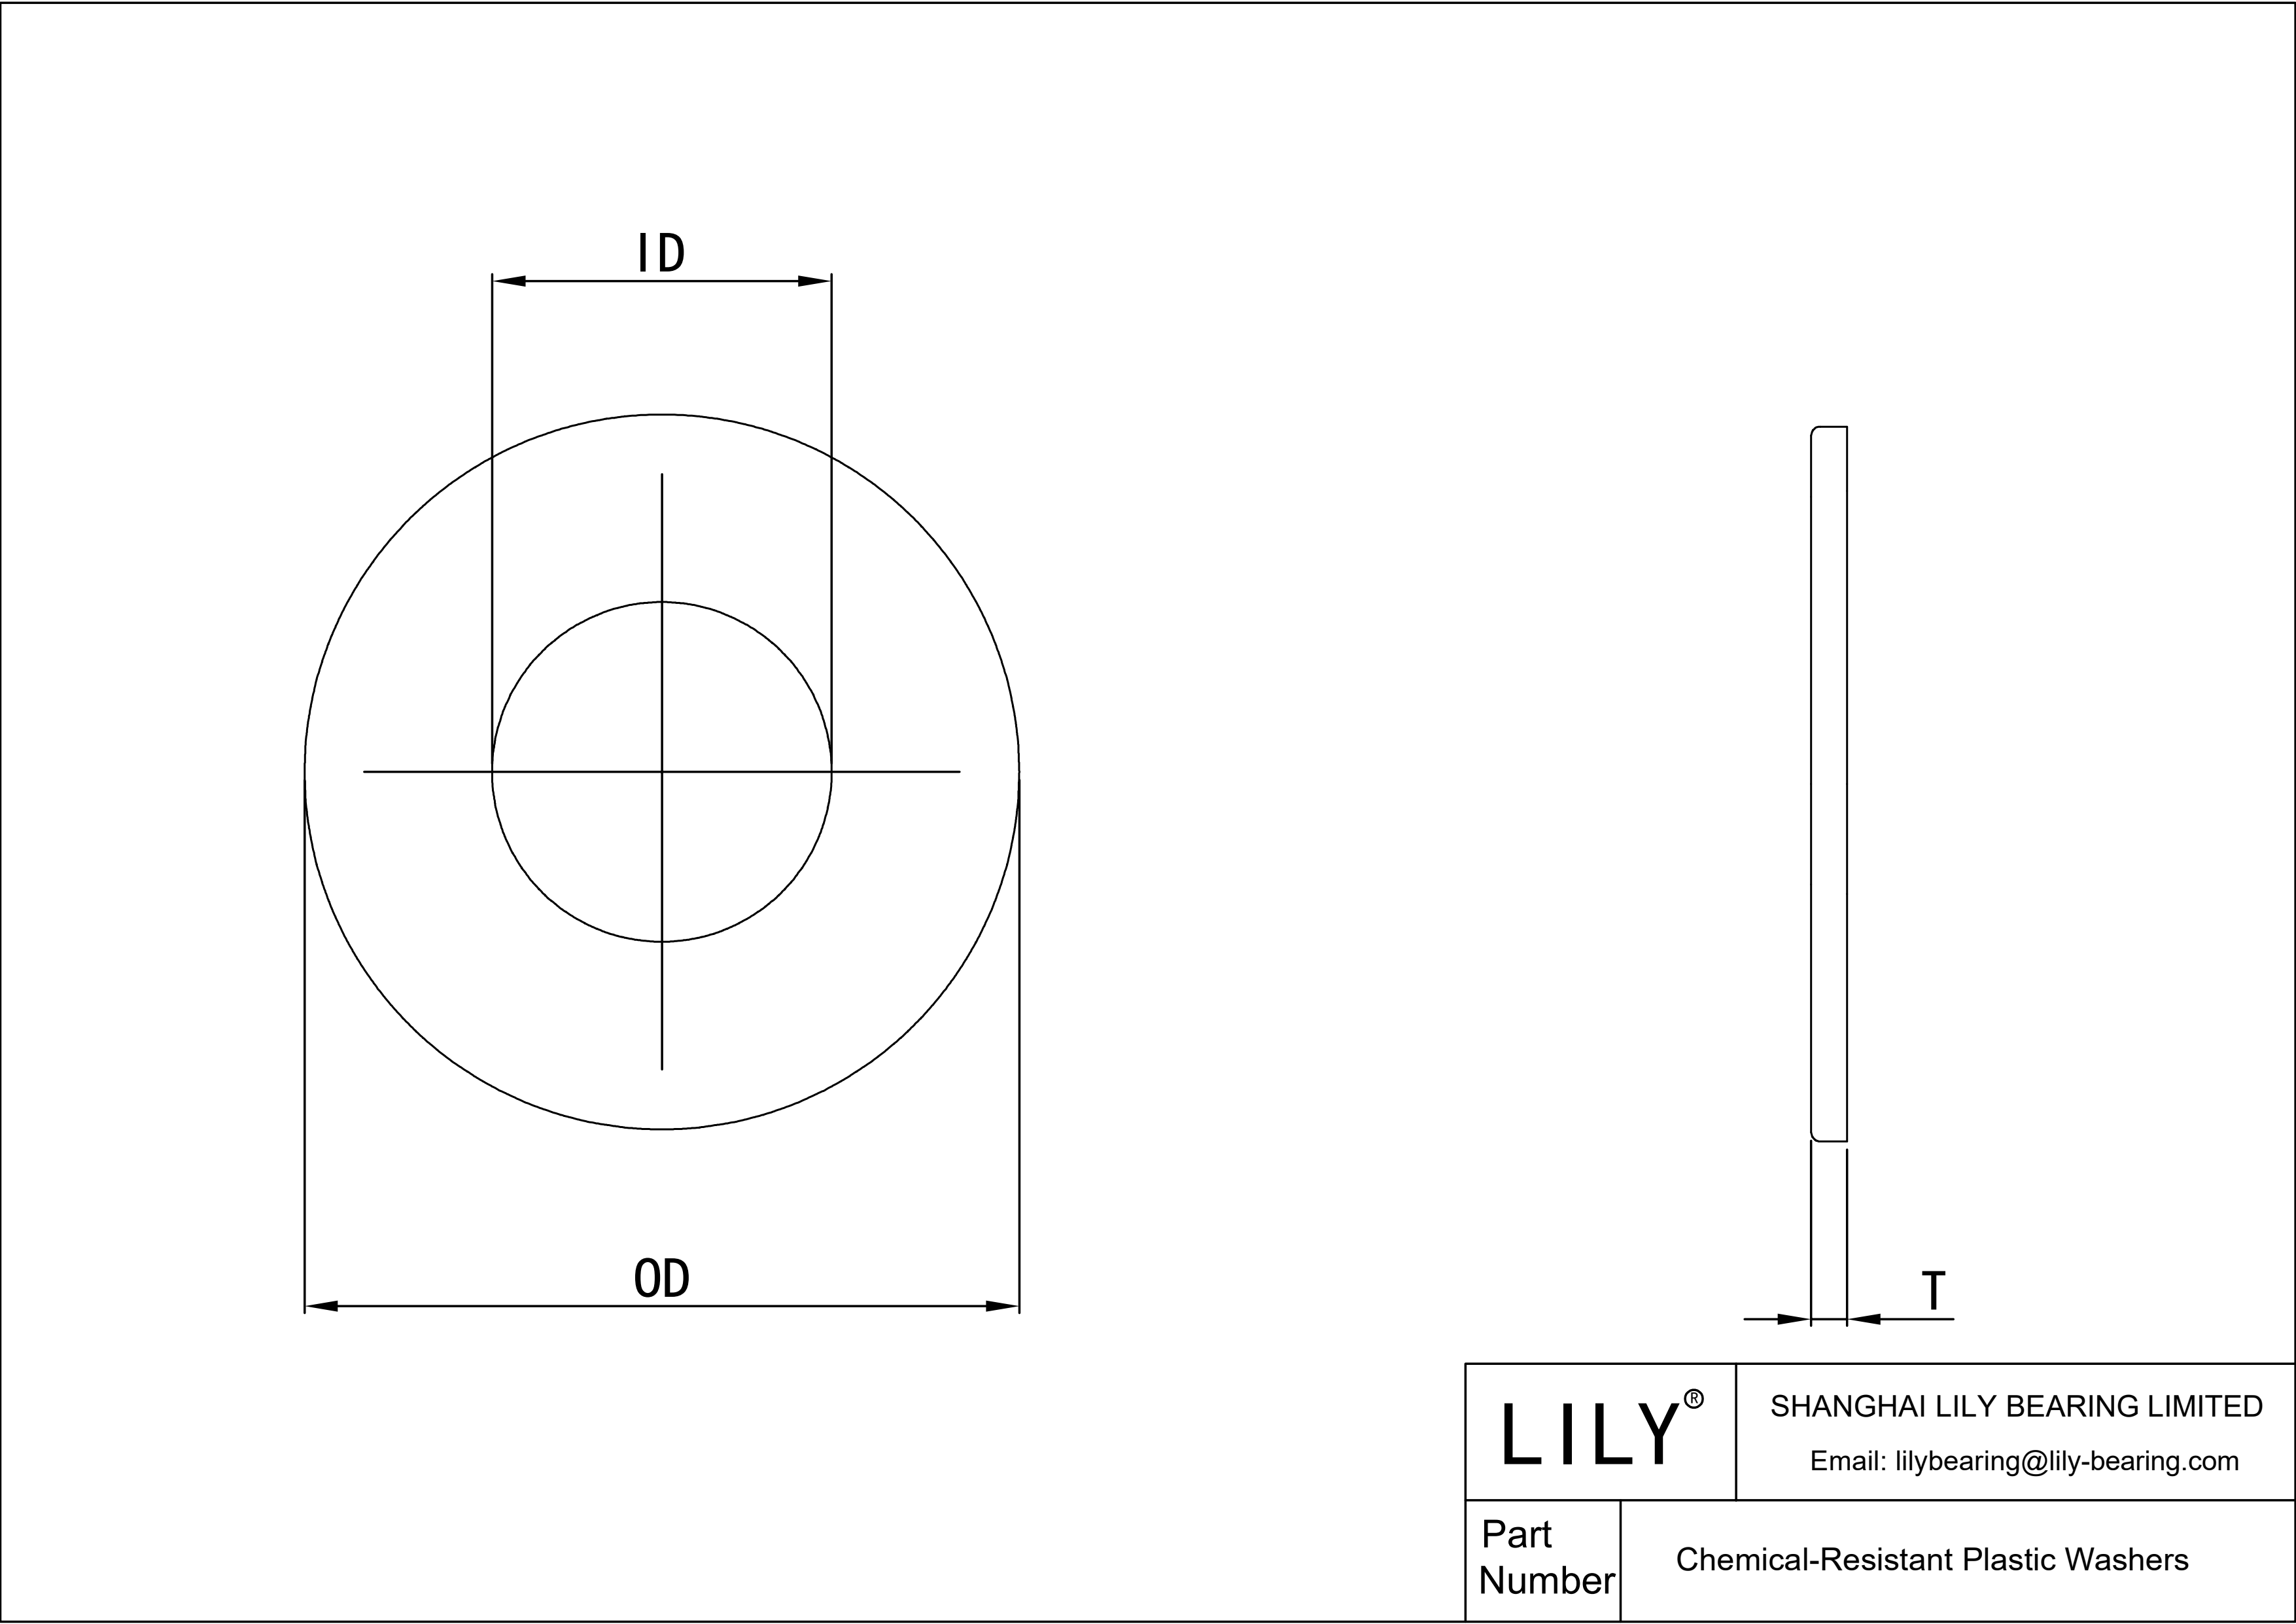 JFGDAAEHF Chemical-Resistant Plastic Washers cad drawing